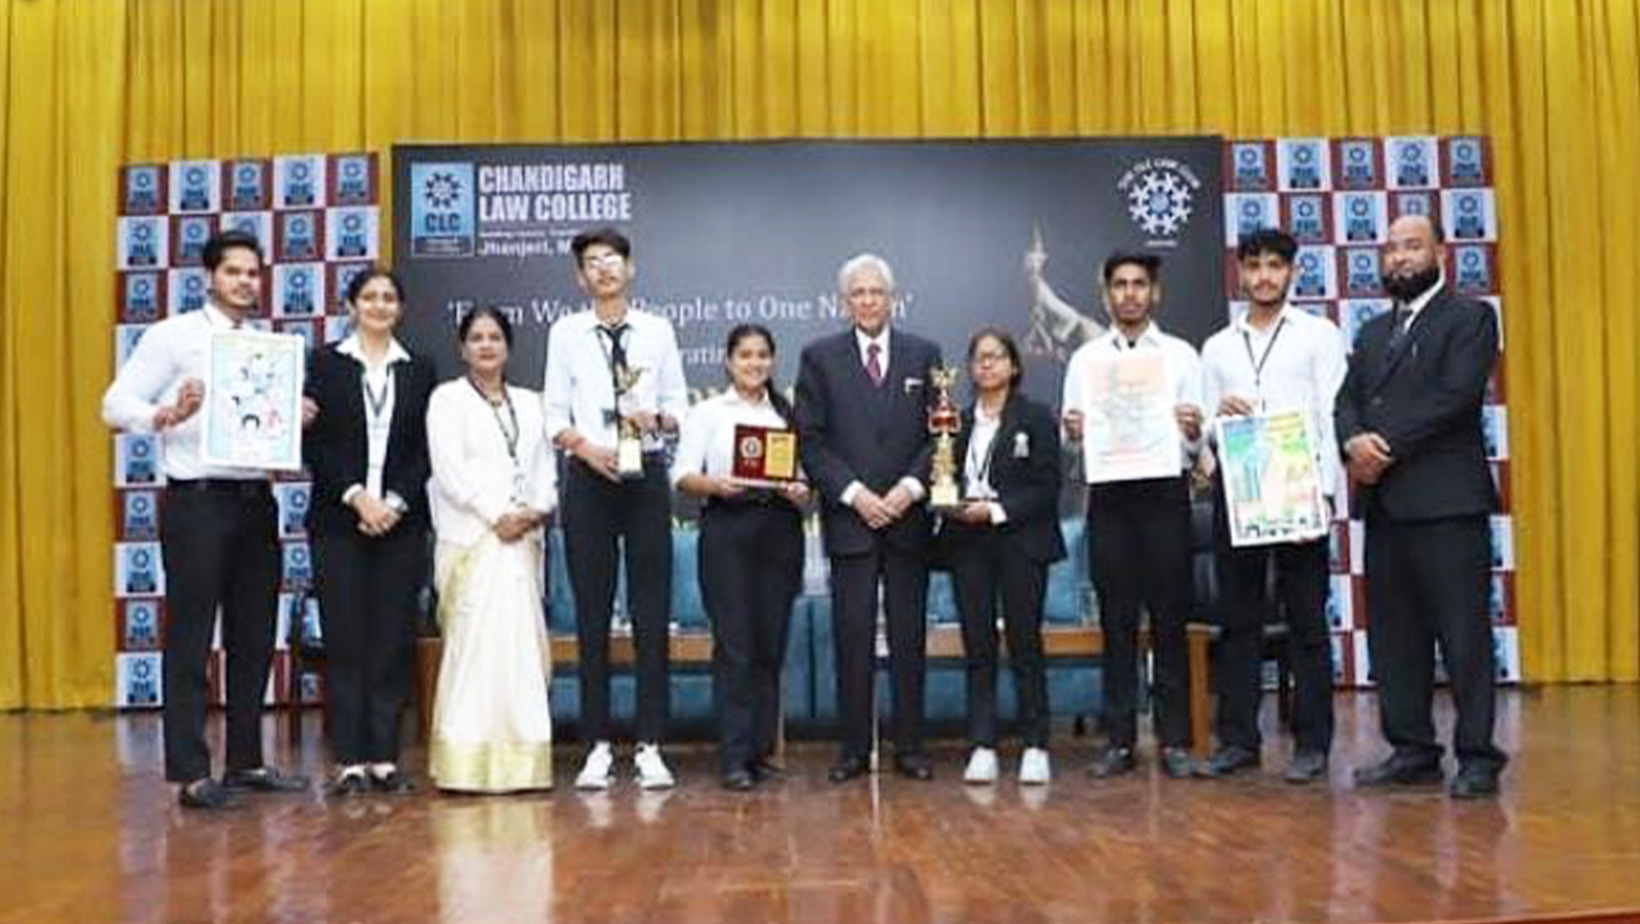 Chandigarh Law College Marks Constitution Day with Enthusiasm and Commitment